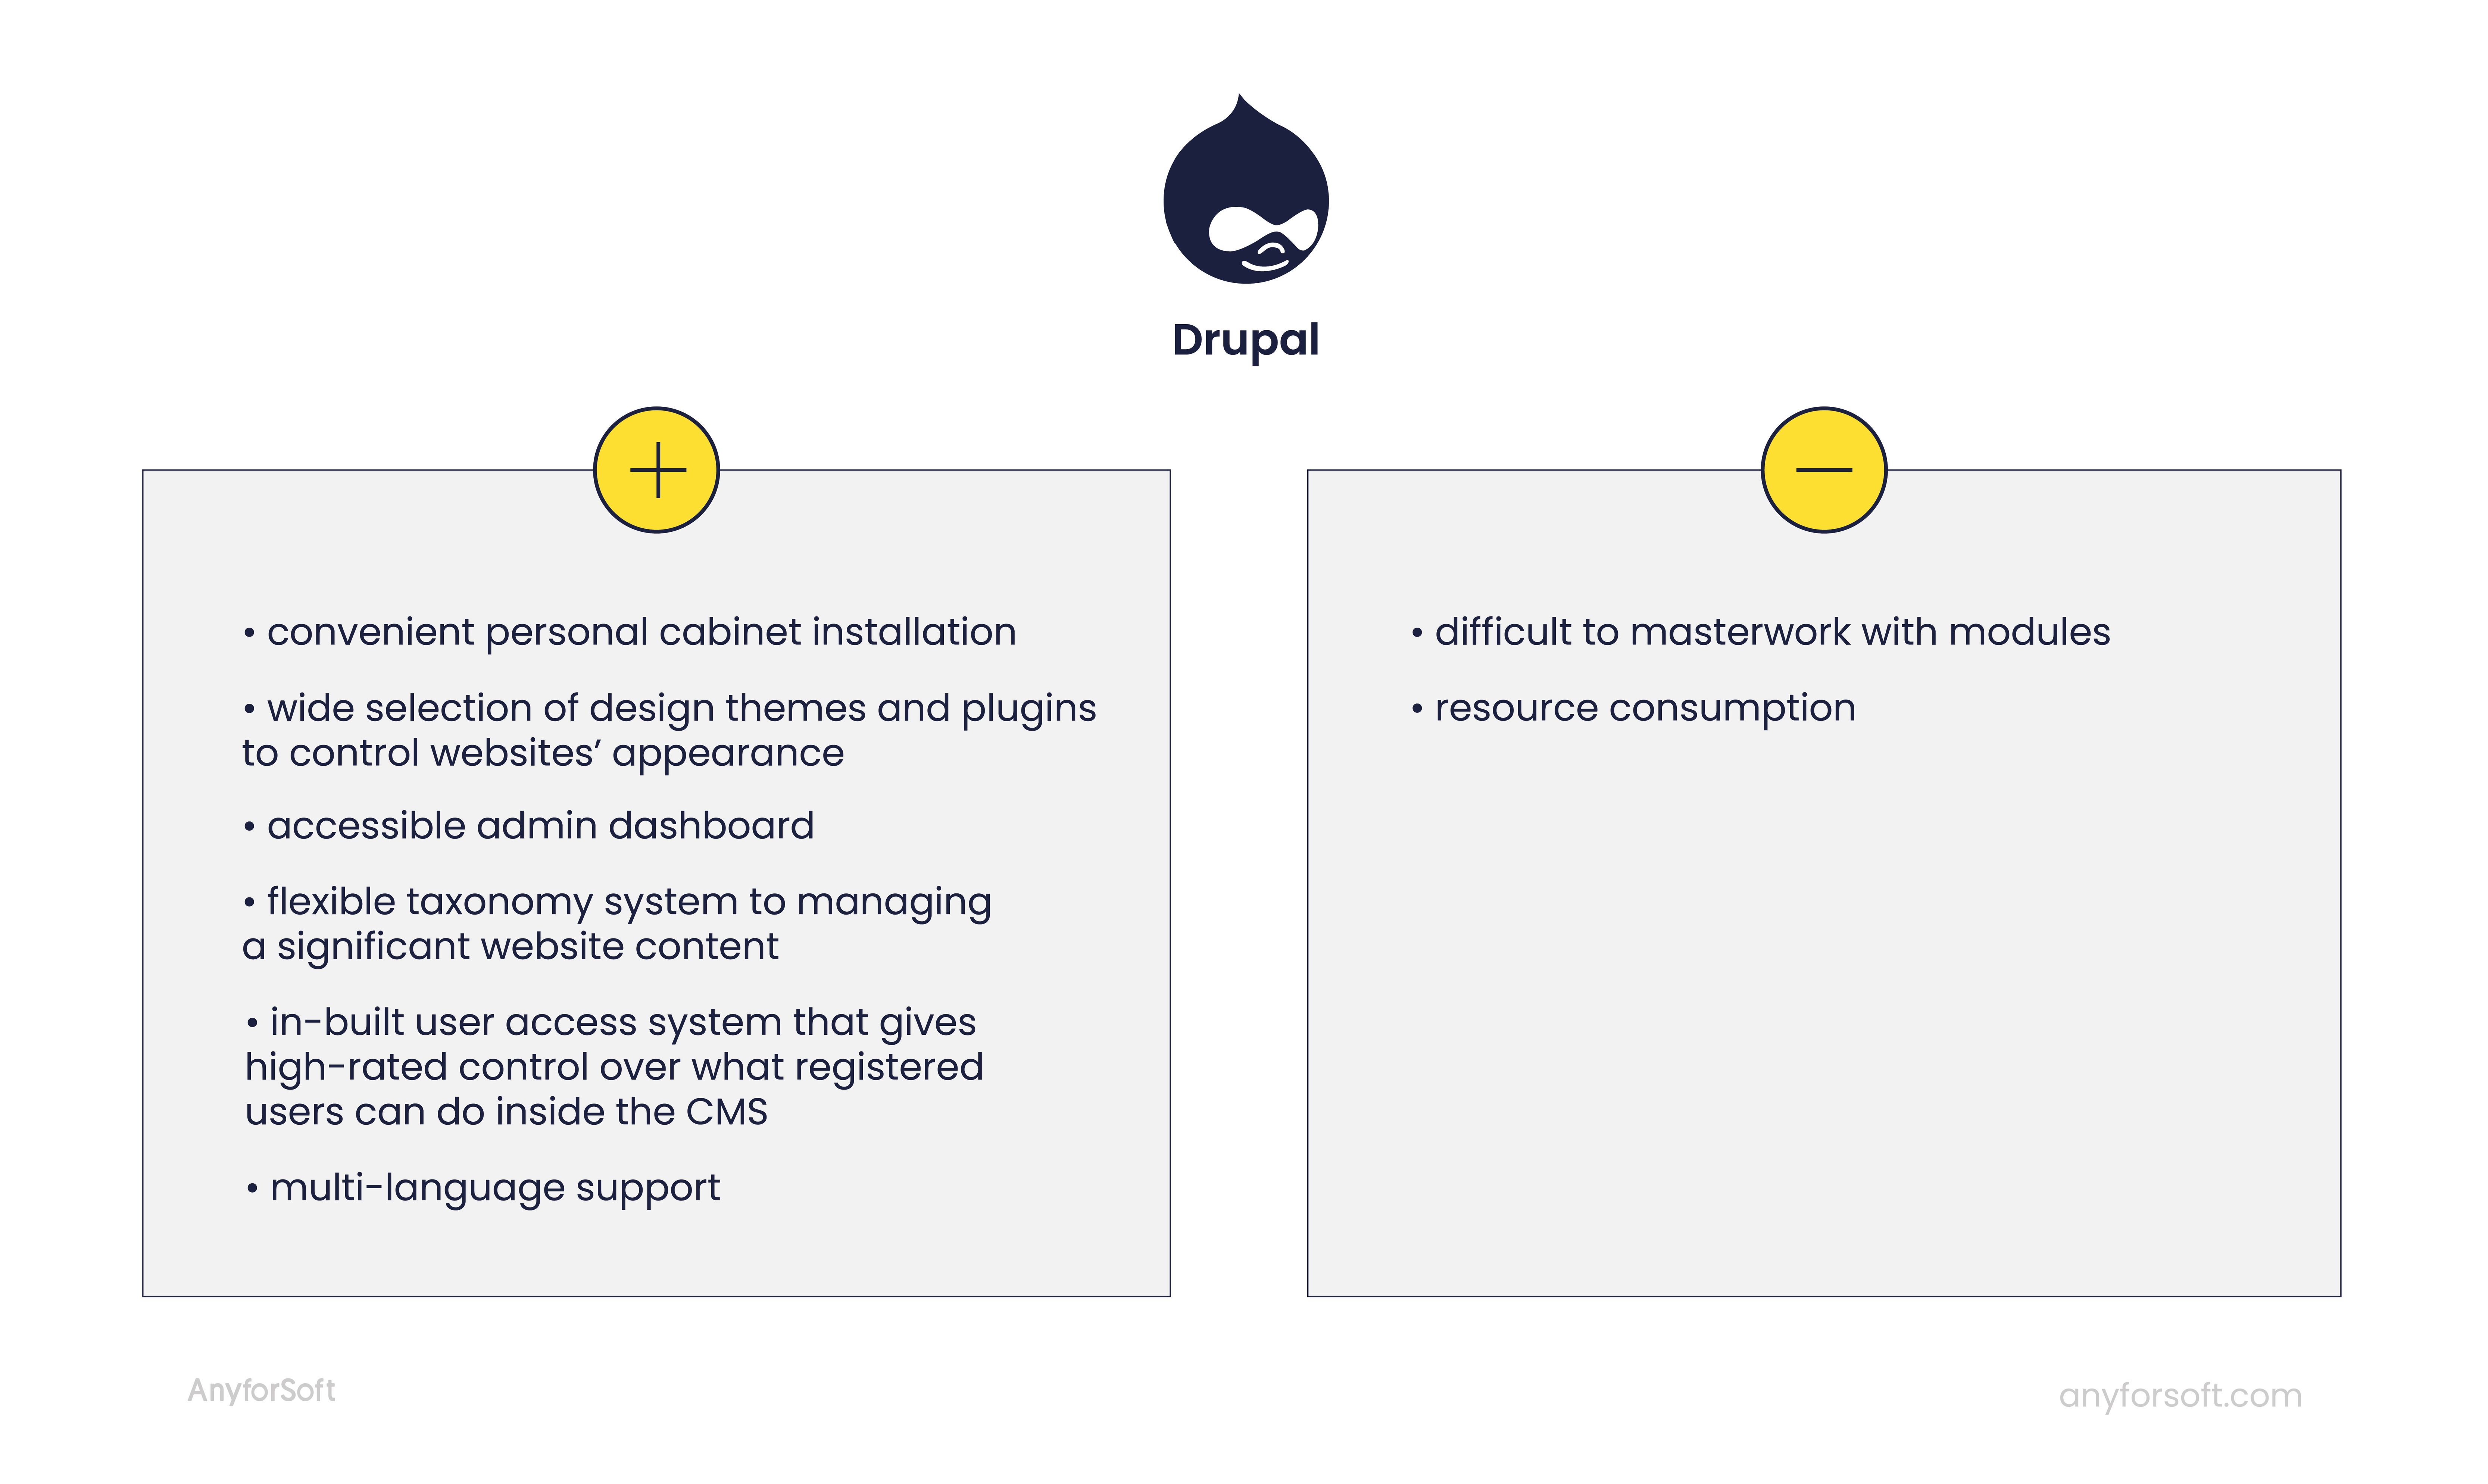 drupal pros and cons